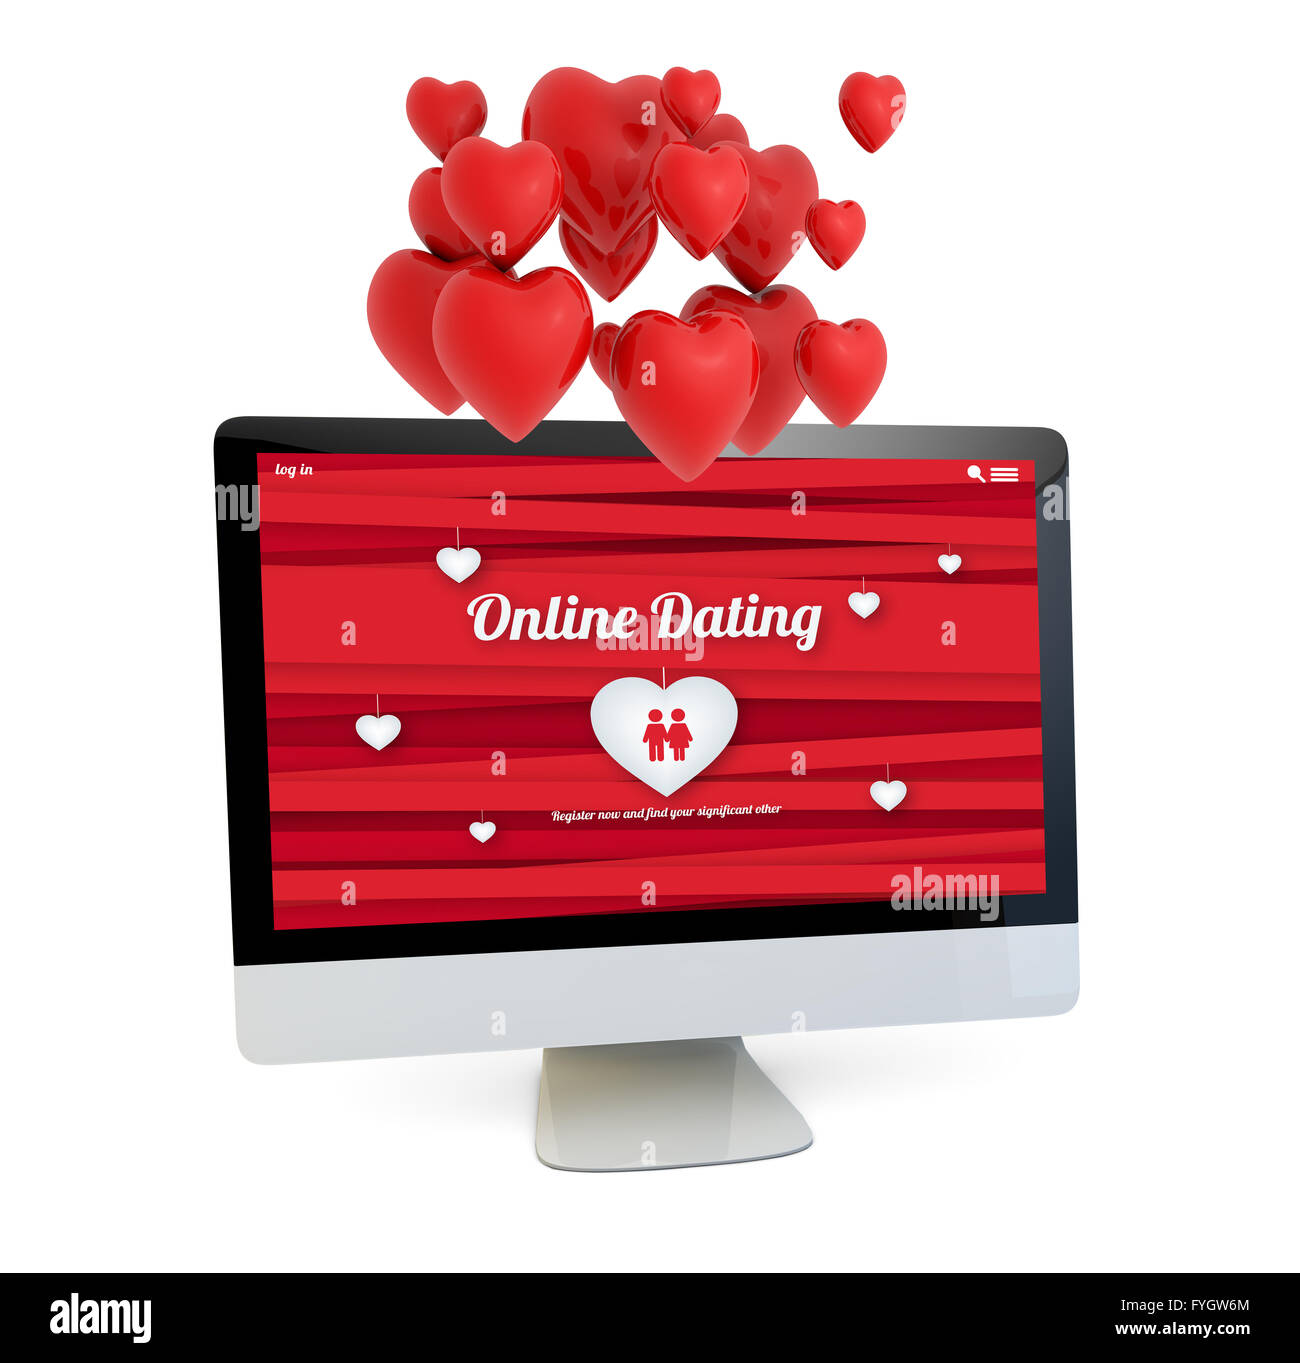 modern online dating concept: render of a computer with online dating website on the screen isolated. Screen graphics are made u Stock Photo